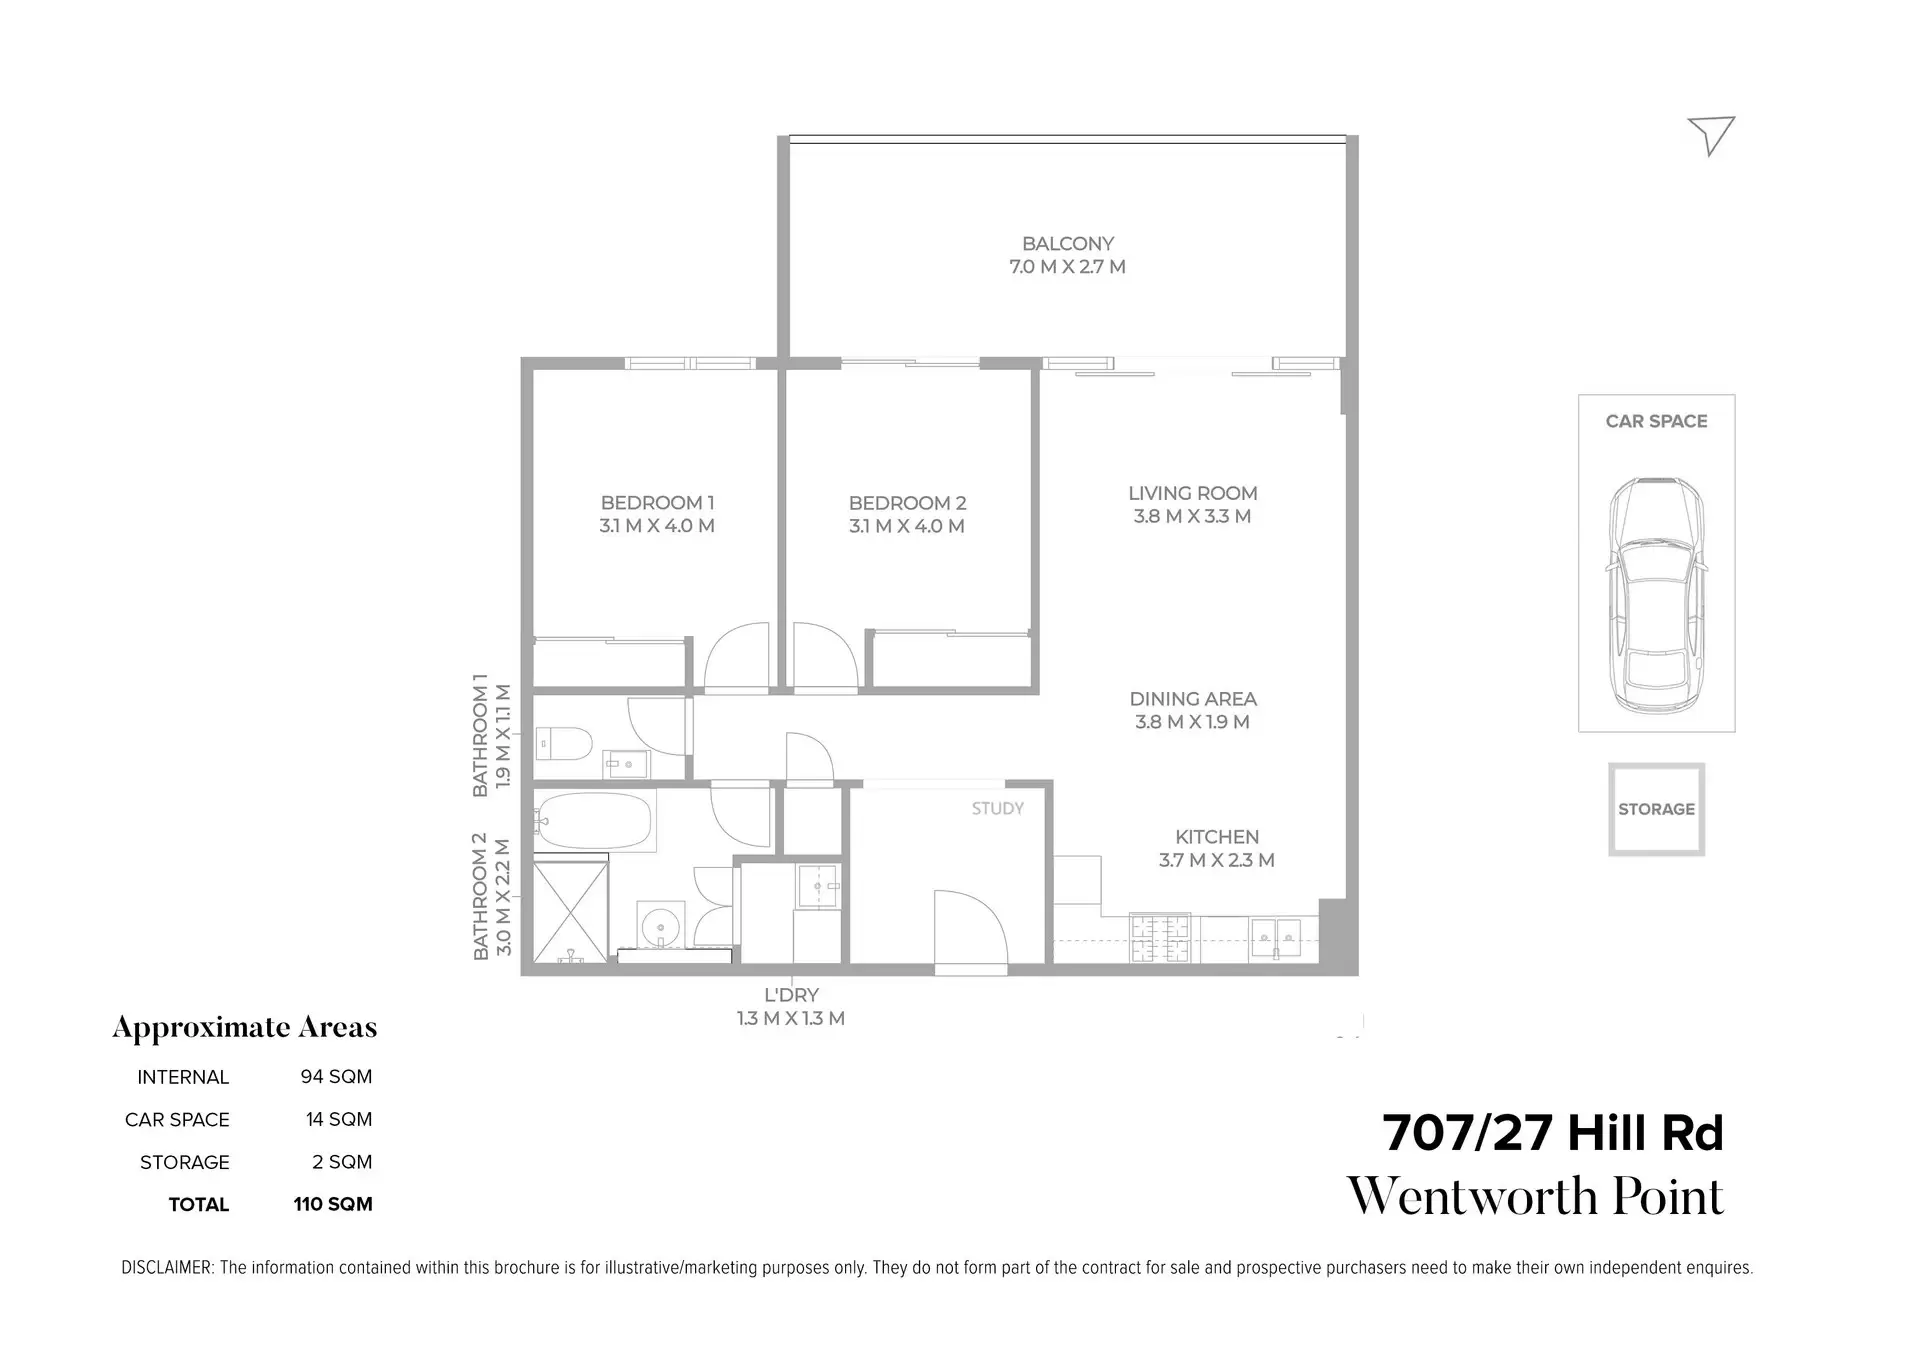 707/27 Hill Road, Wentworth Point For Sale by Chidiac Realty - floorplan